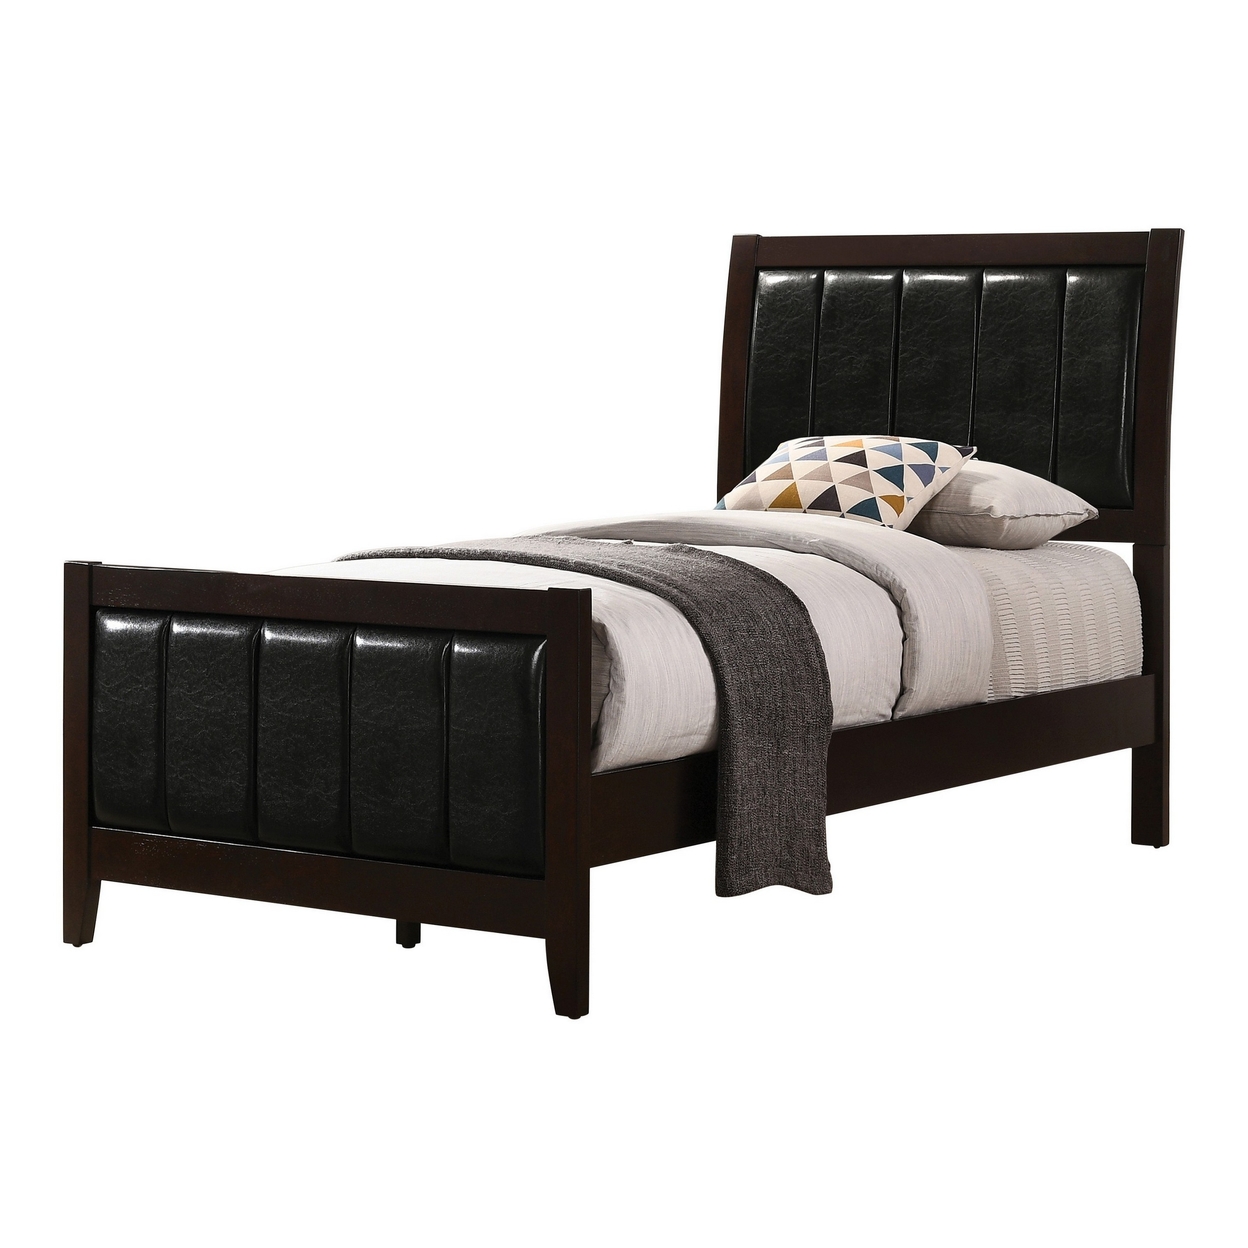 Vida Twin Size Panel Bed, Black Leather Upholstery, Tapered Legs, Brown- Saltoro Sherpi